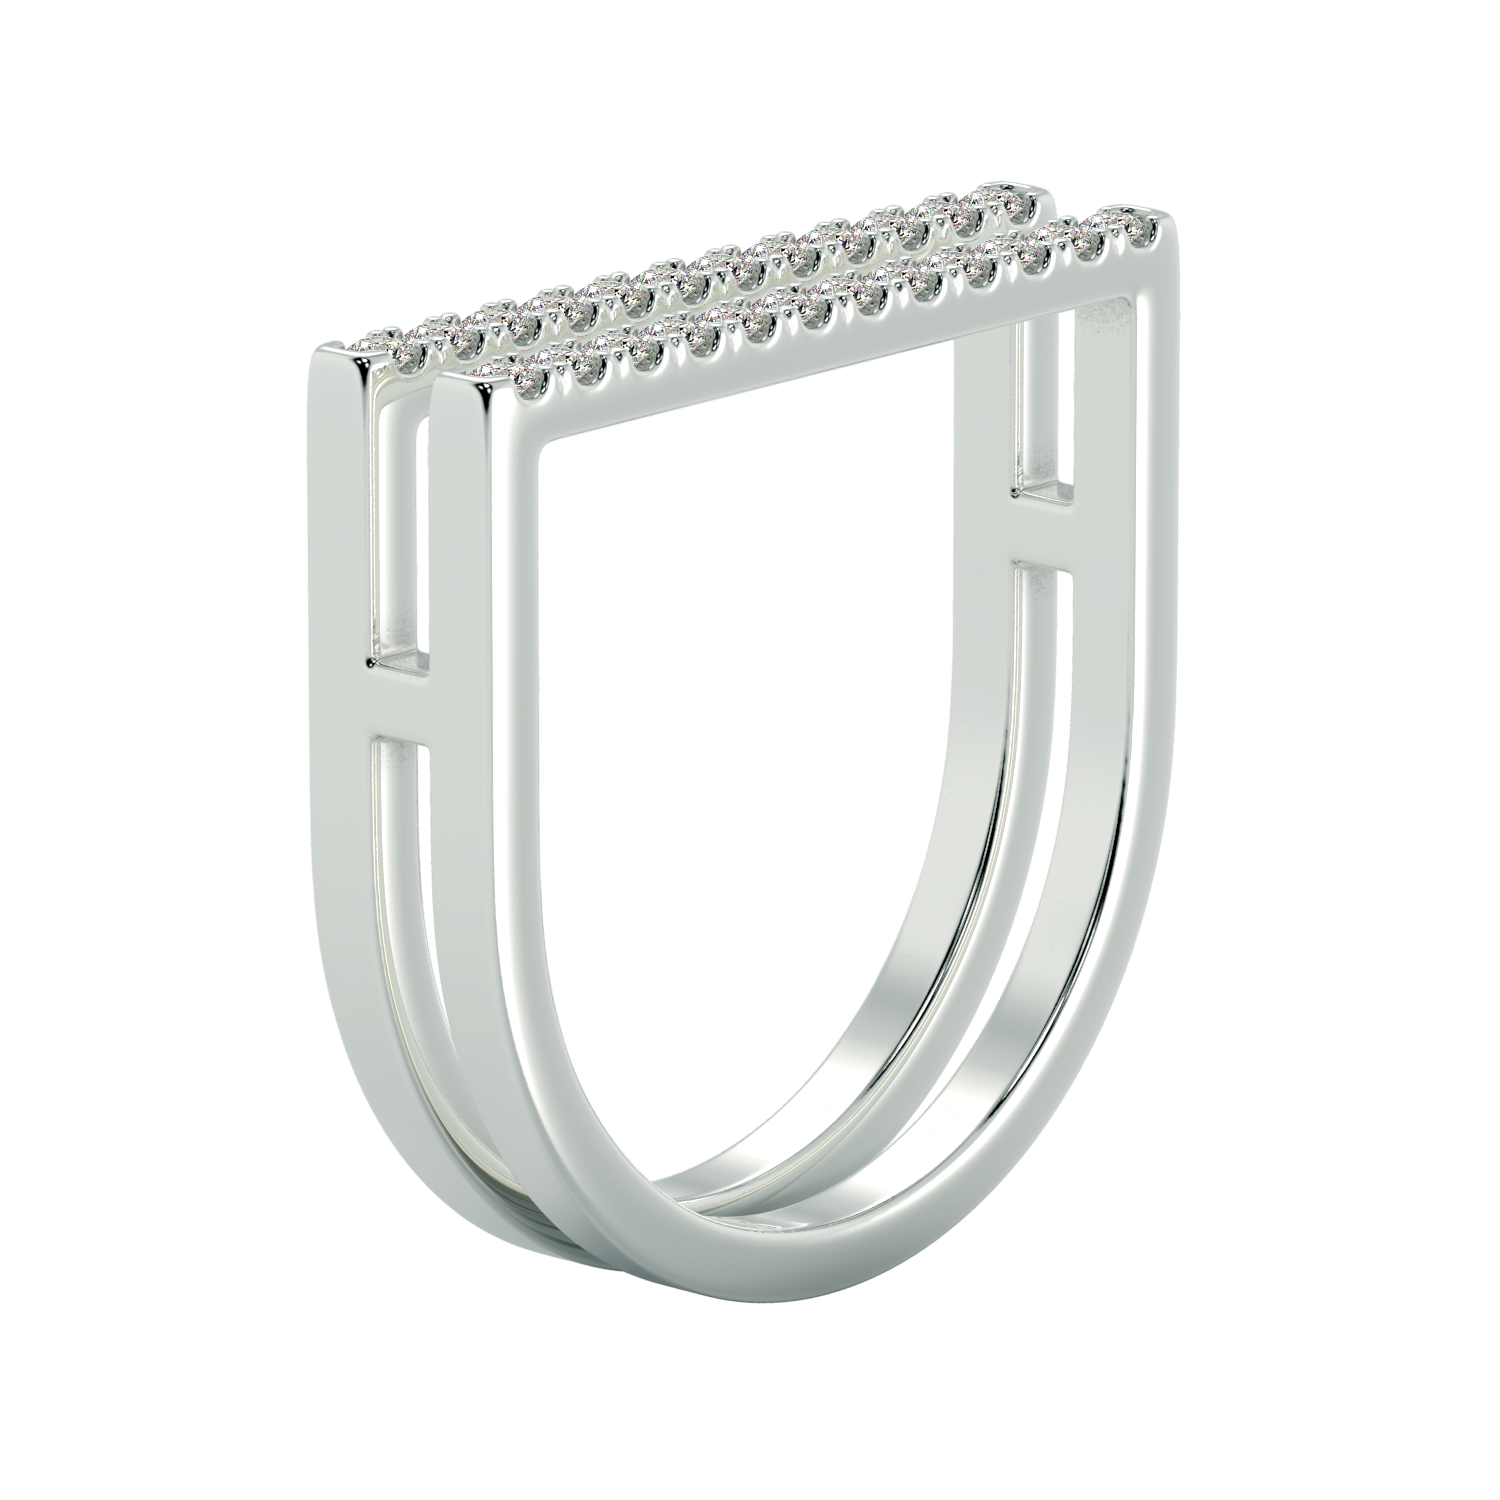 Diamond Double Bar Ring in White Gold